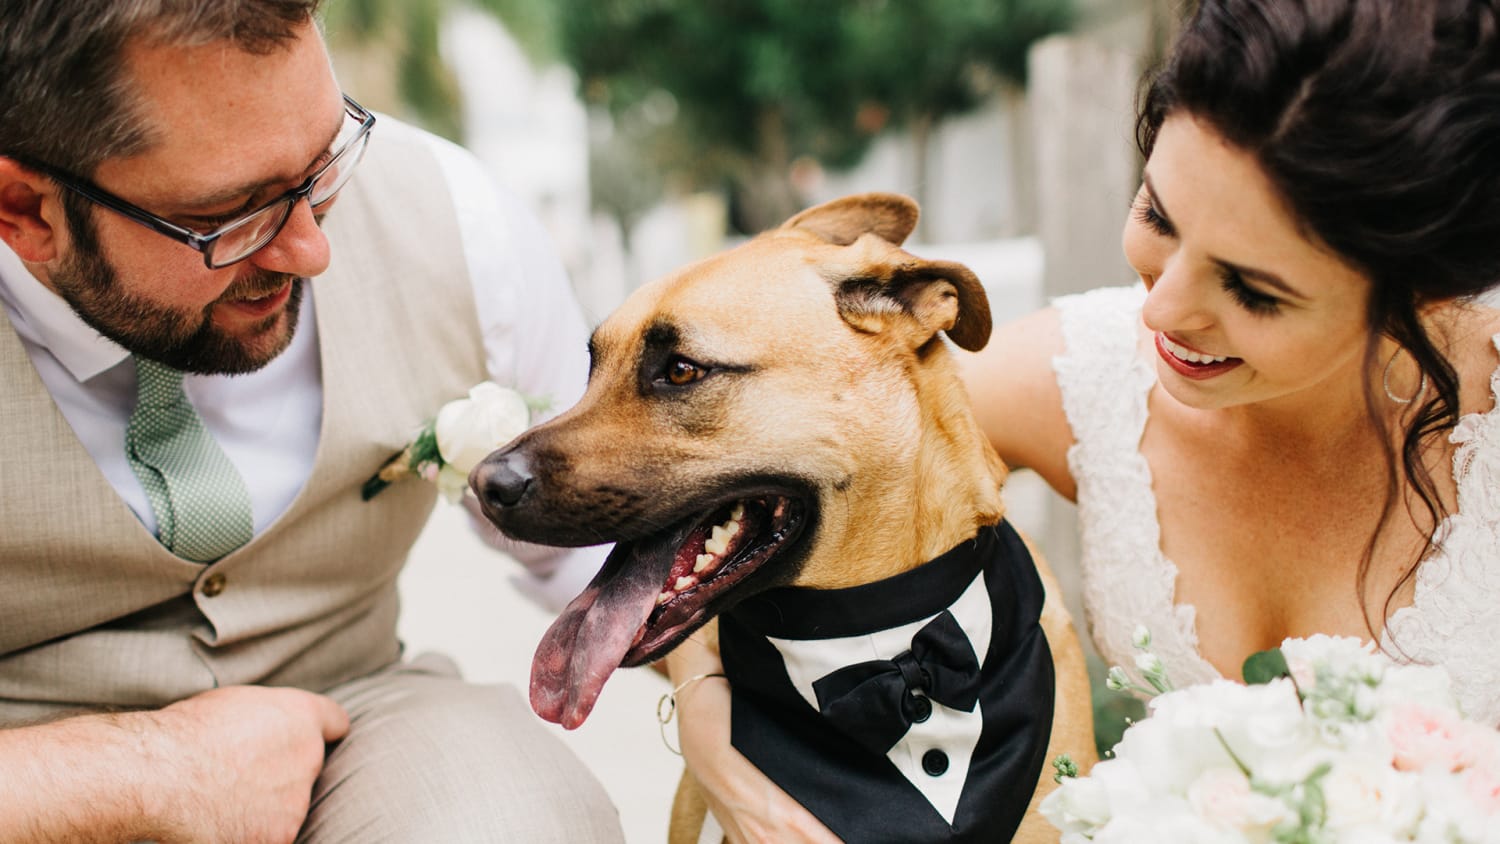 Want a pet in your wedding? This company is here to help